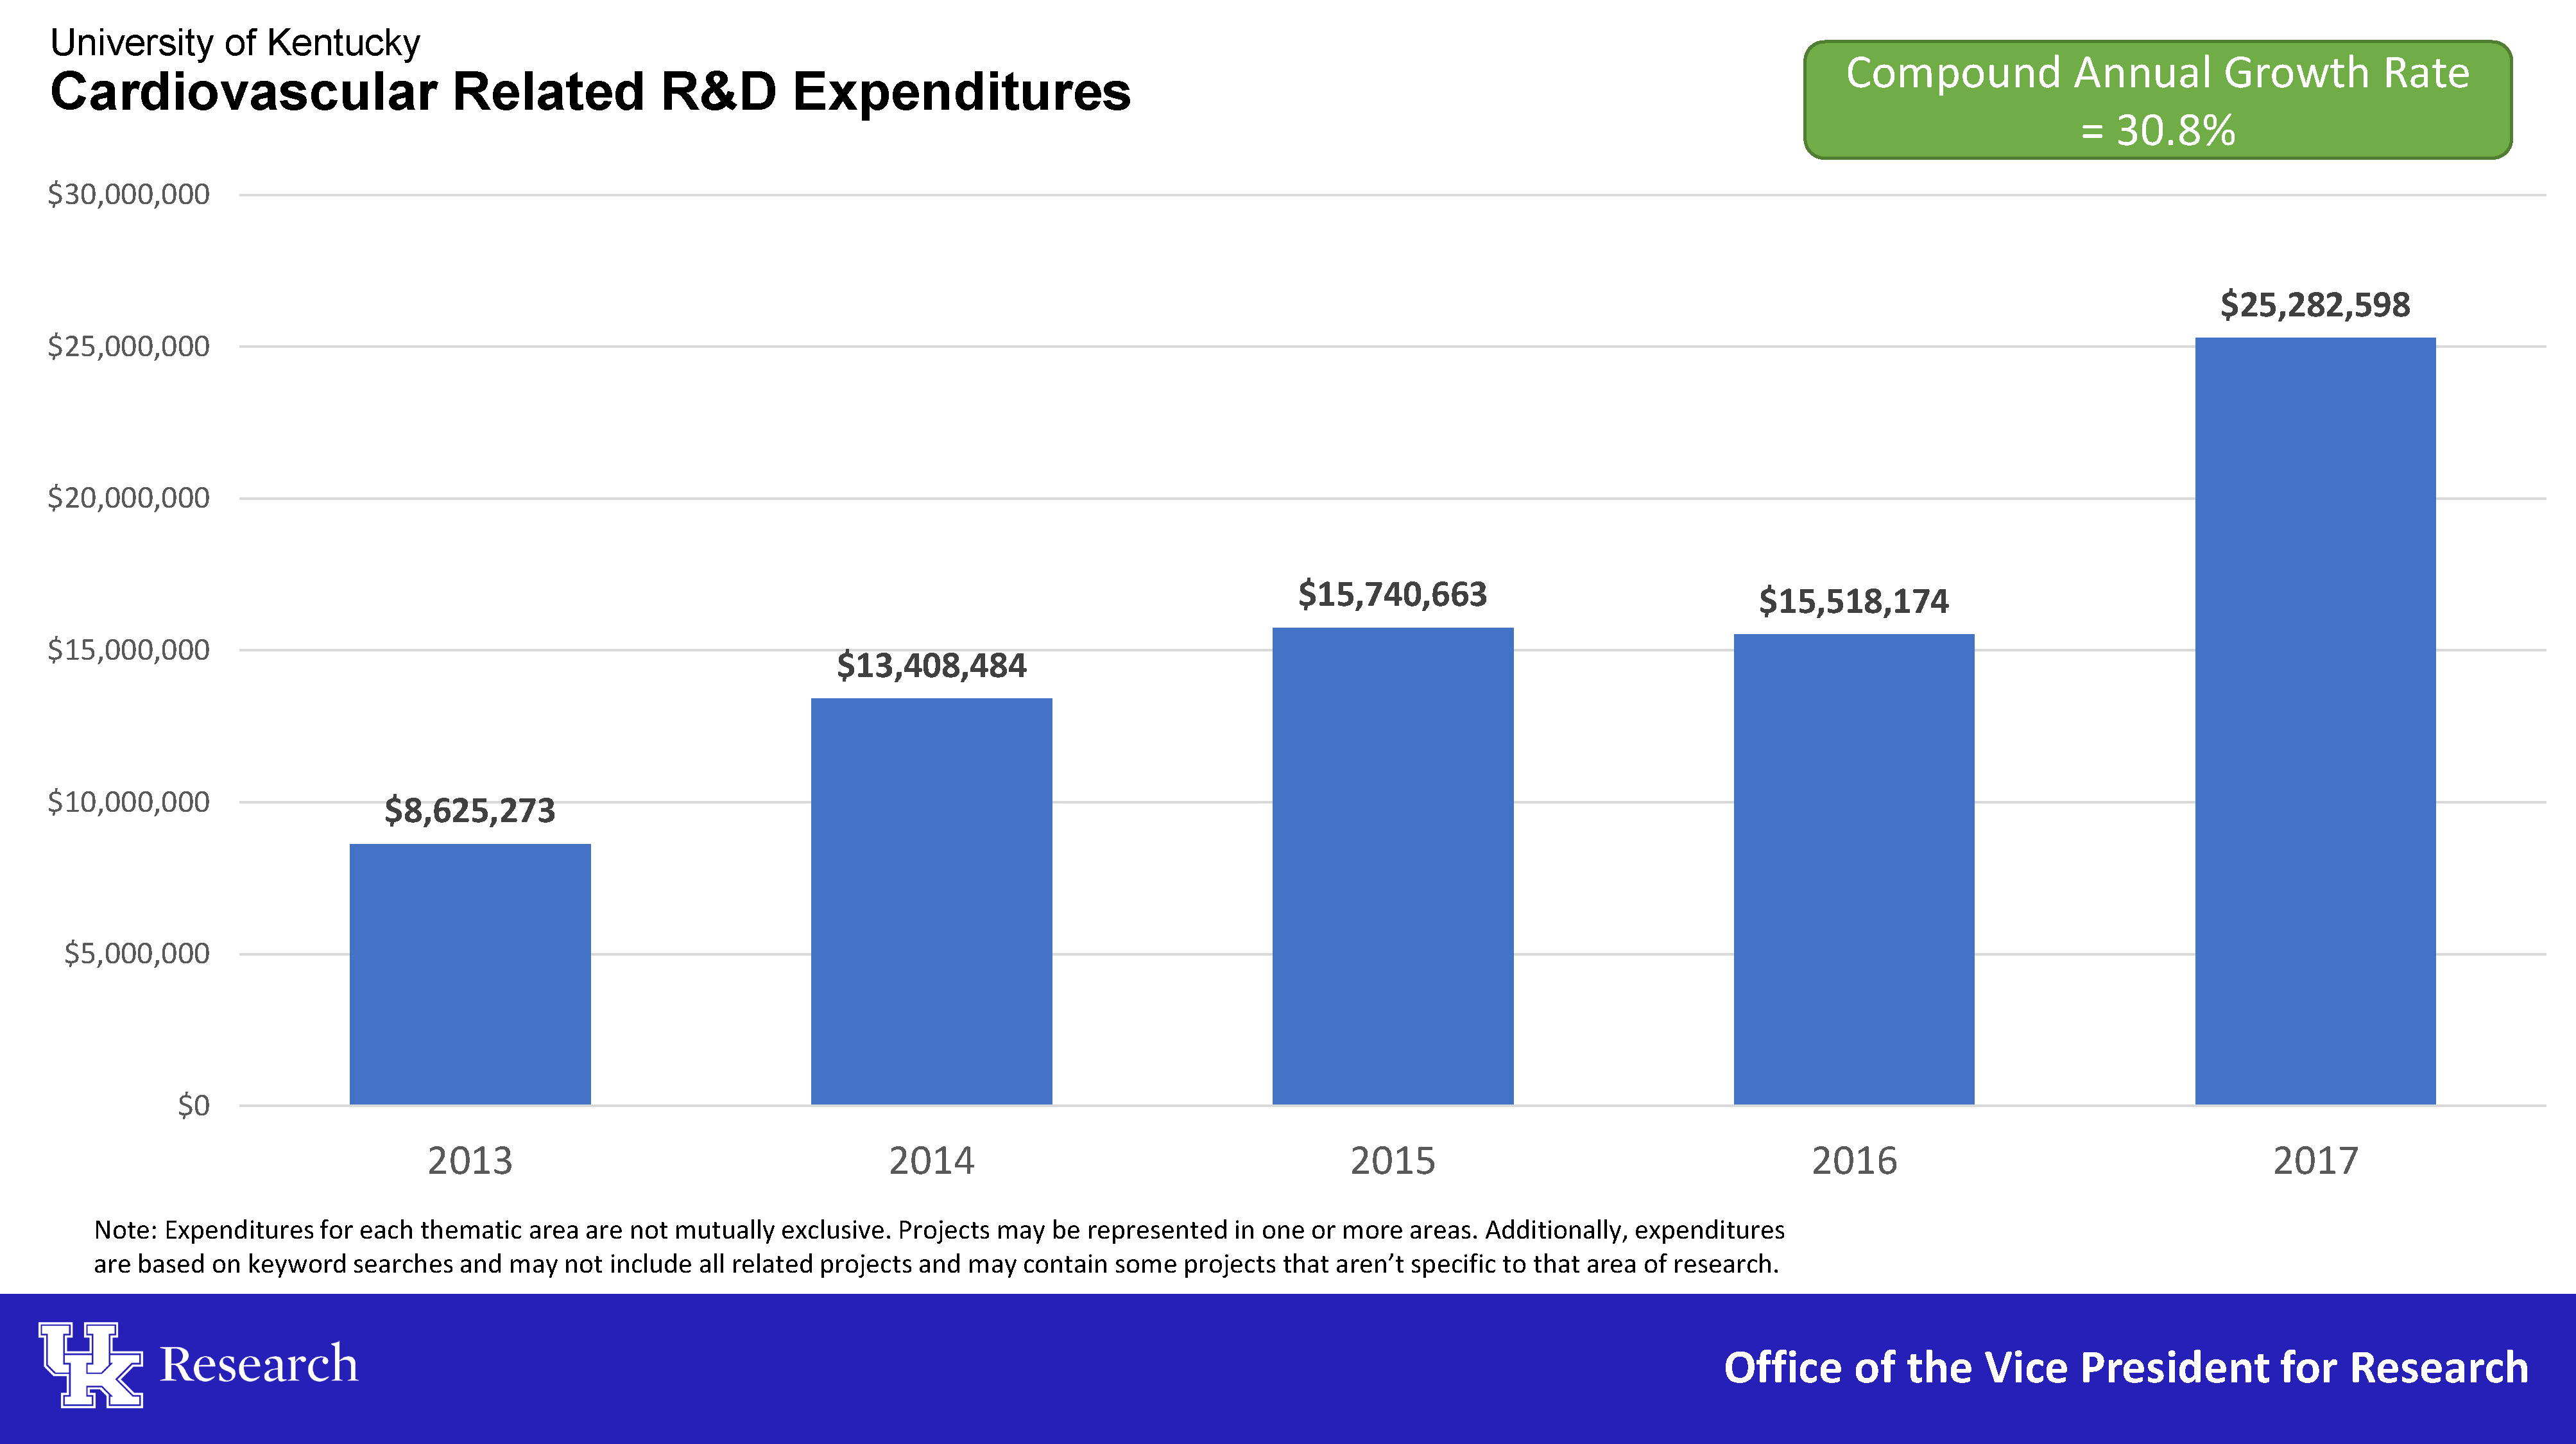 Cardiovascular Related R&D Expenditures 2013-2017